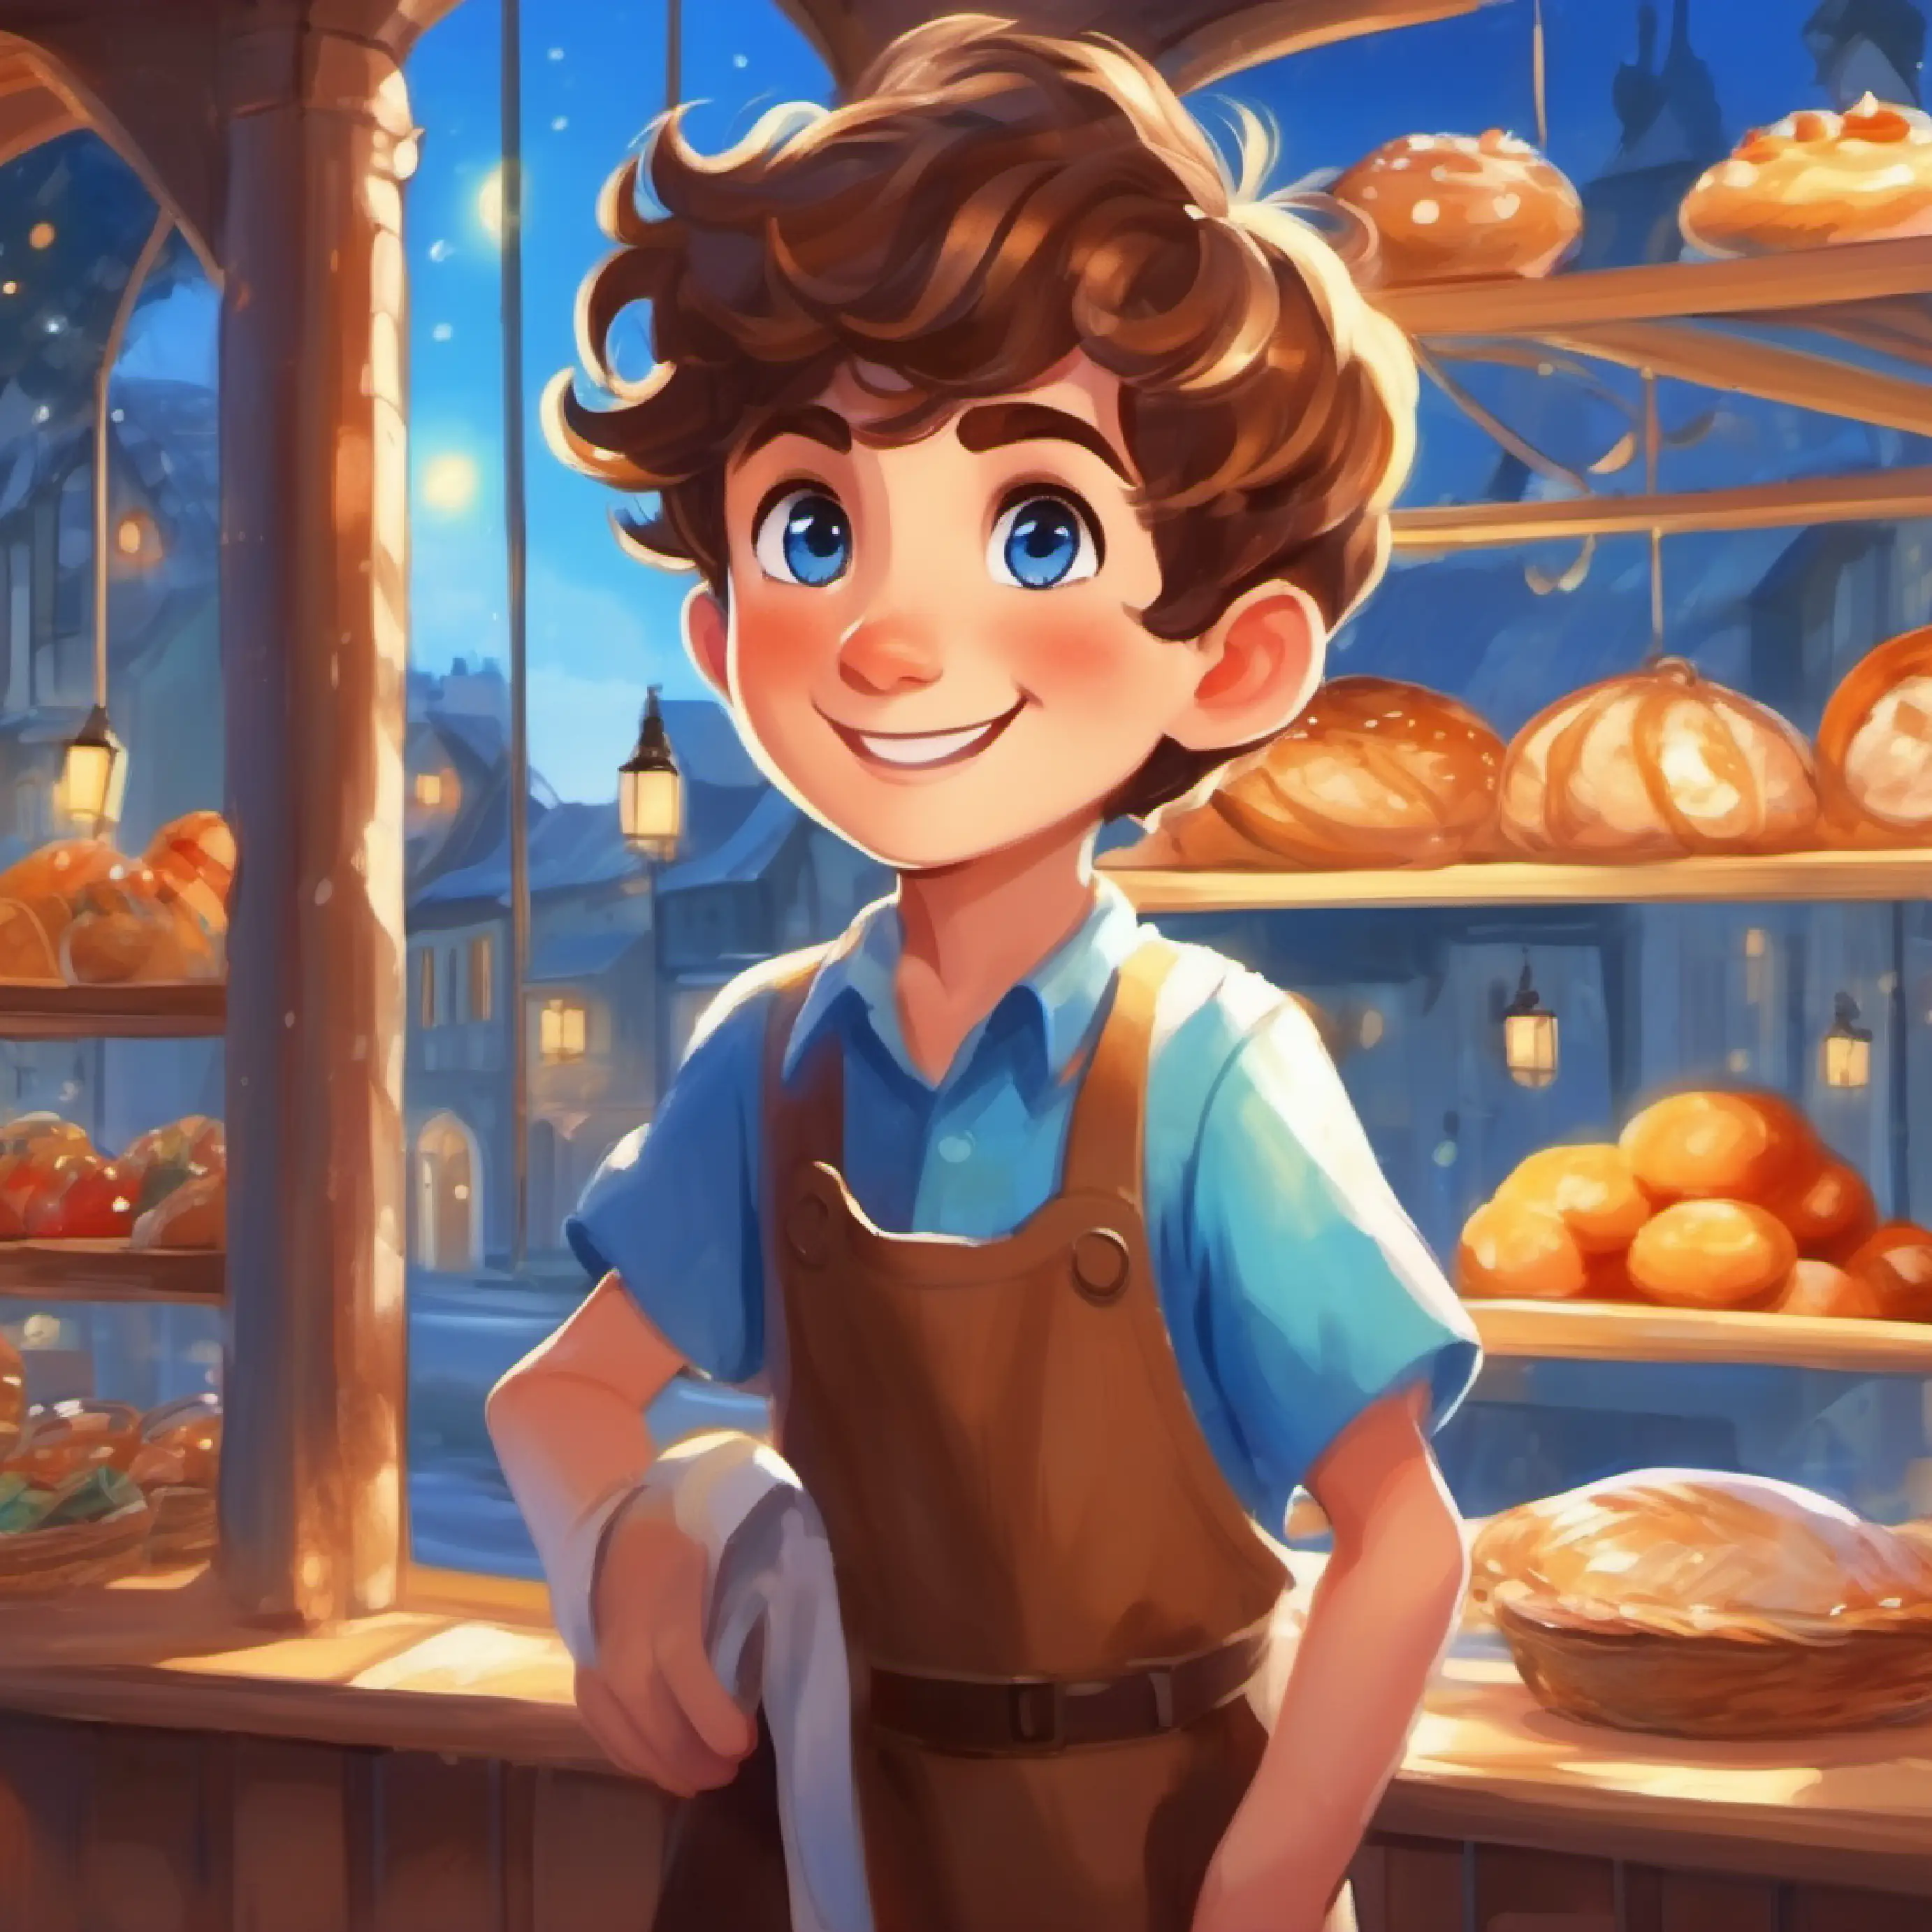 Cheerful boy, short brown hair, sparkling blue eyes visits the baker, who misses the sunshine